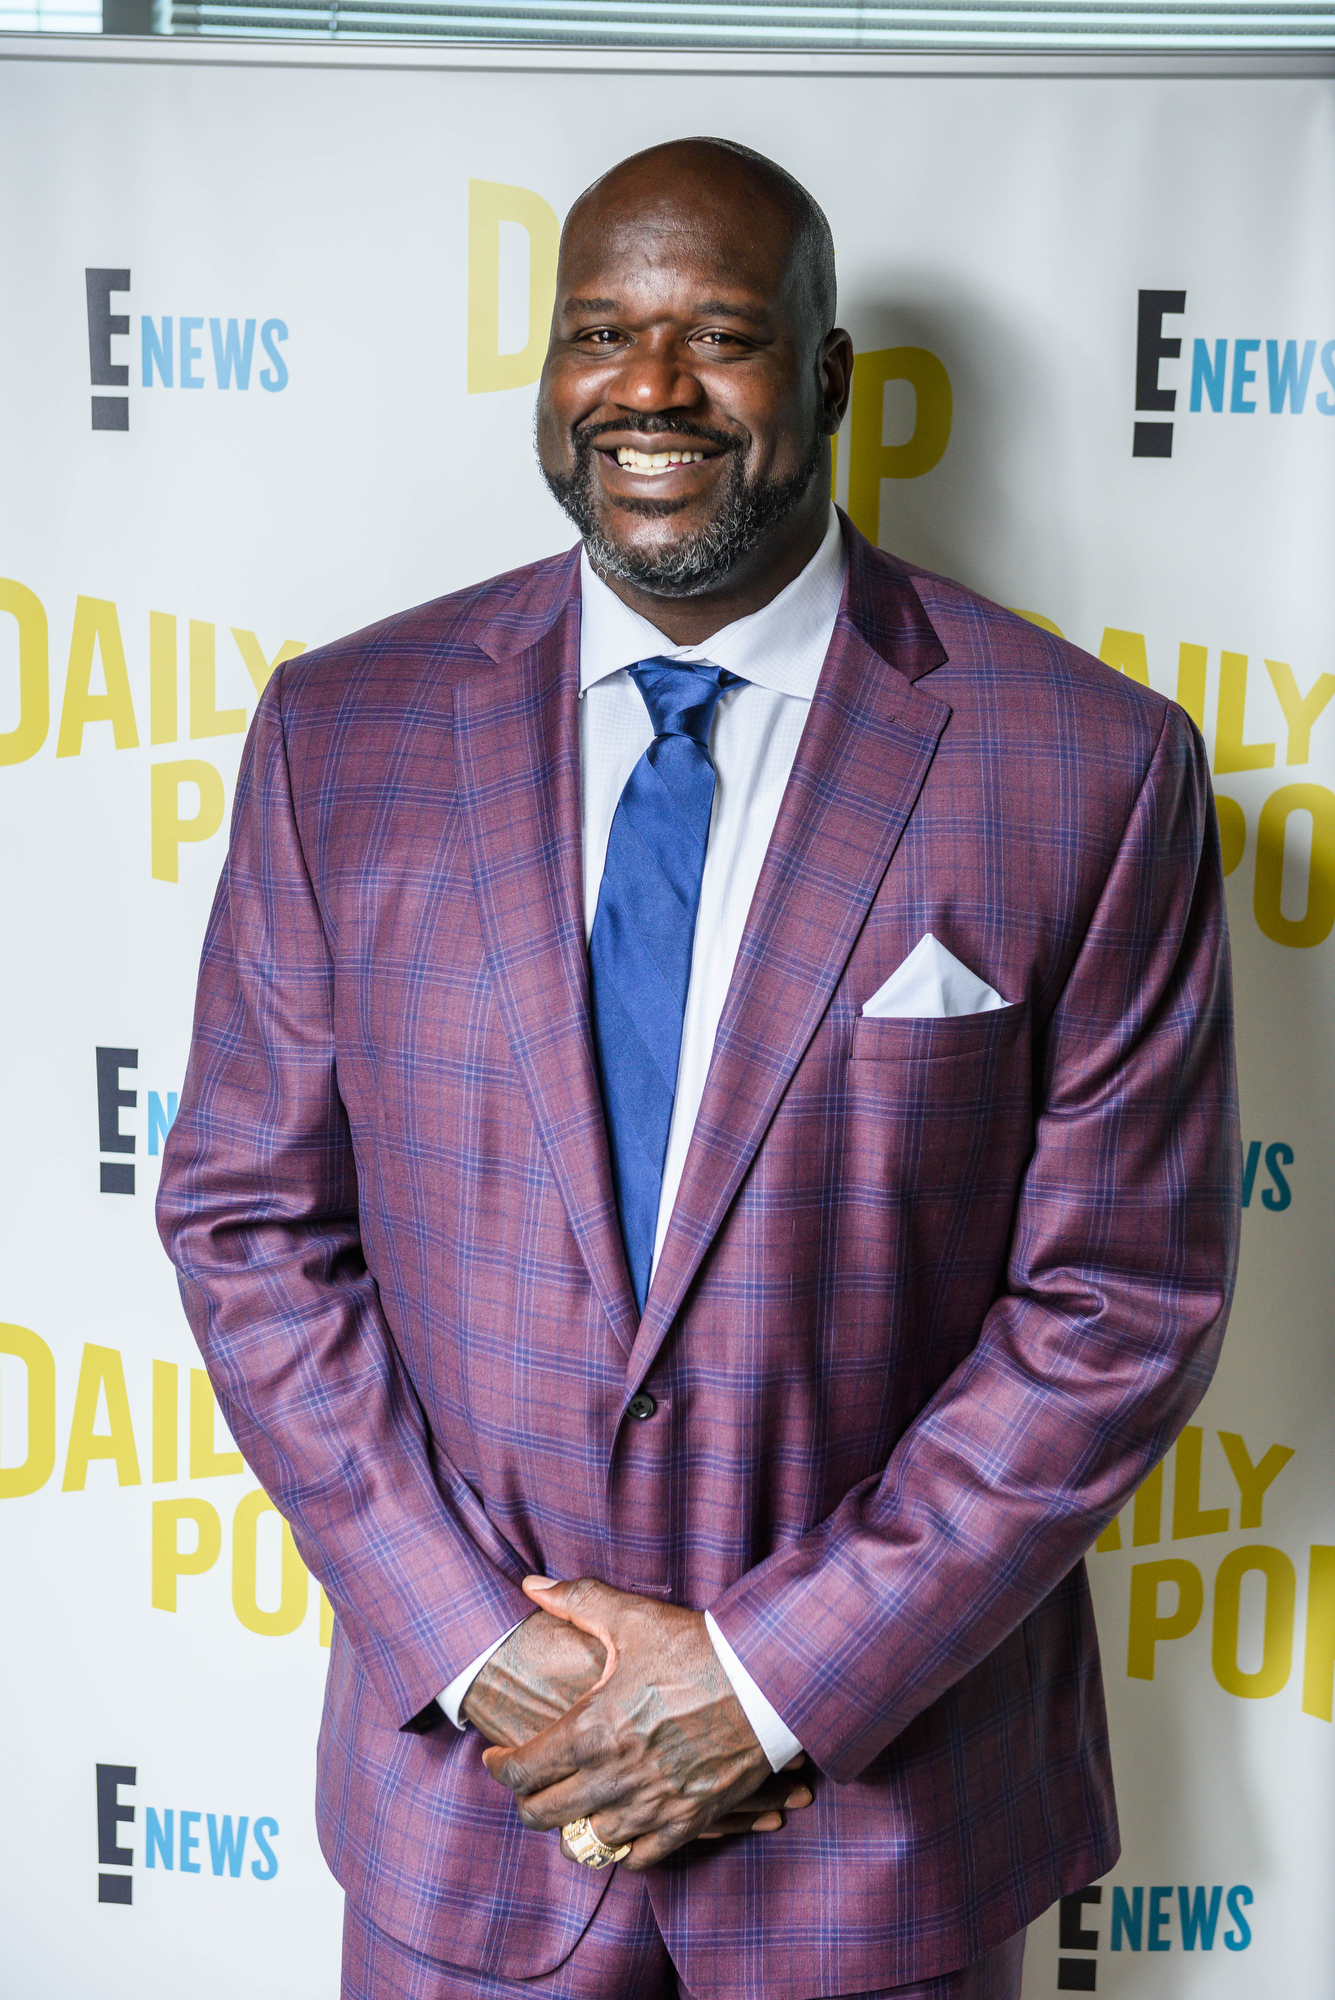 Shaquille O'Neal on the set of Daily Pop in 2019 | Source: Getty Images